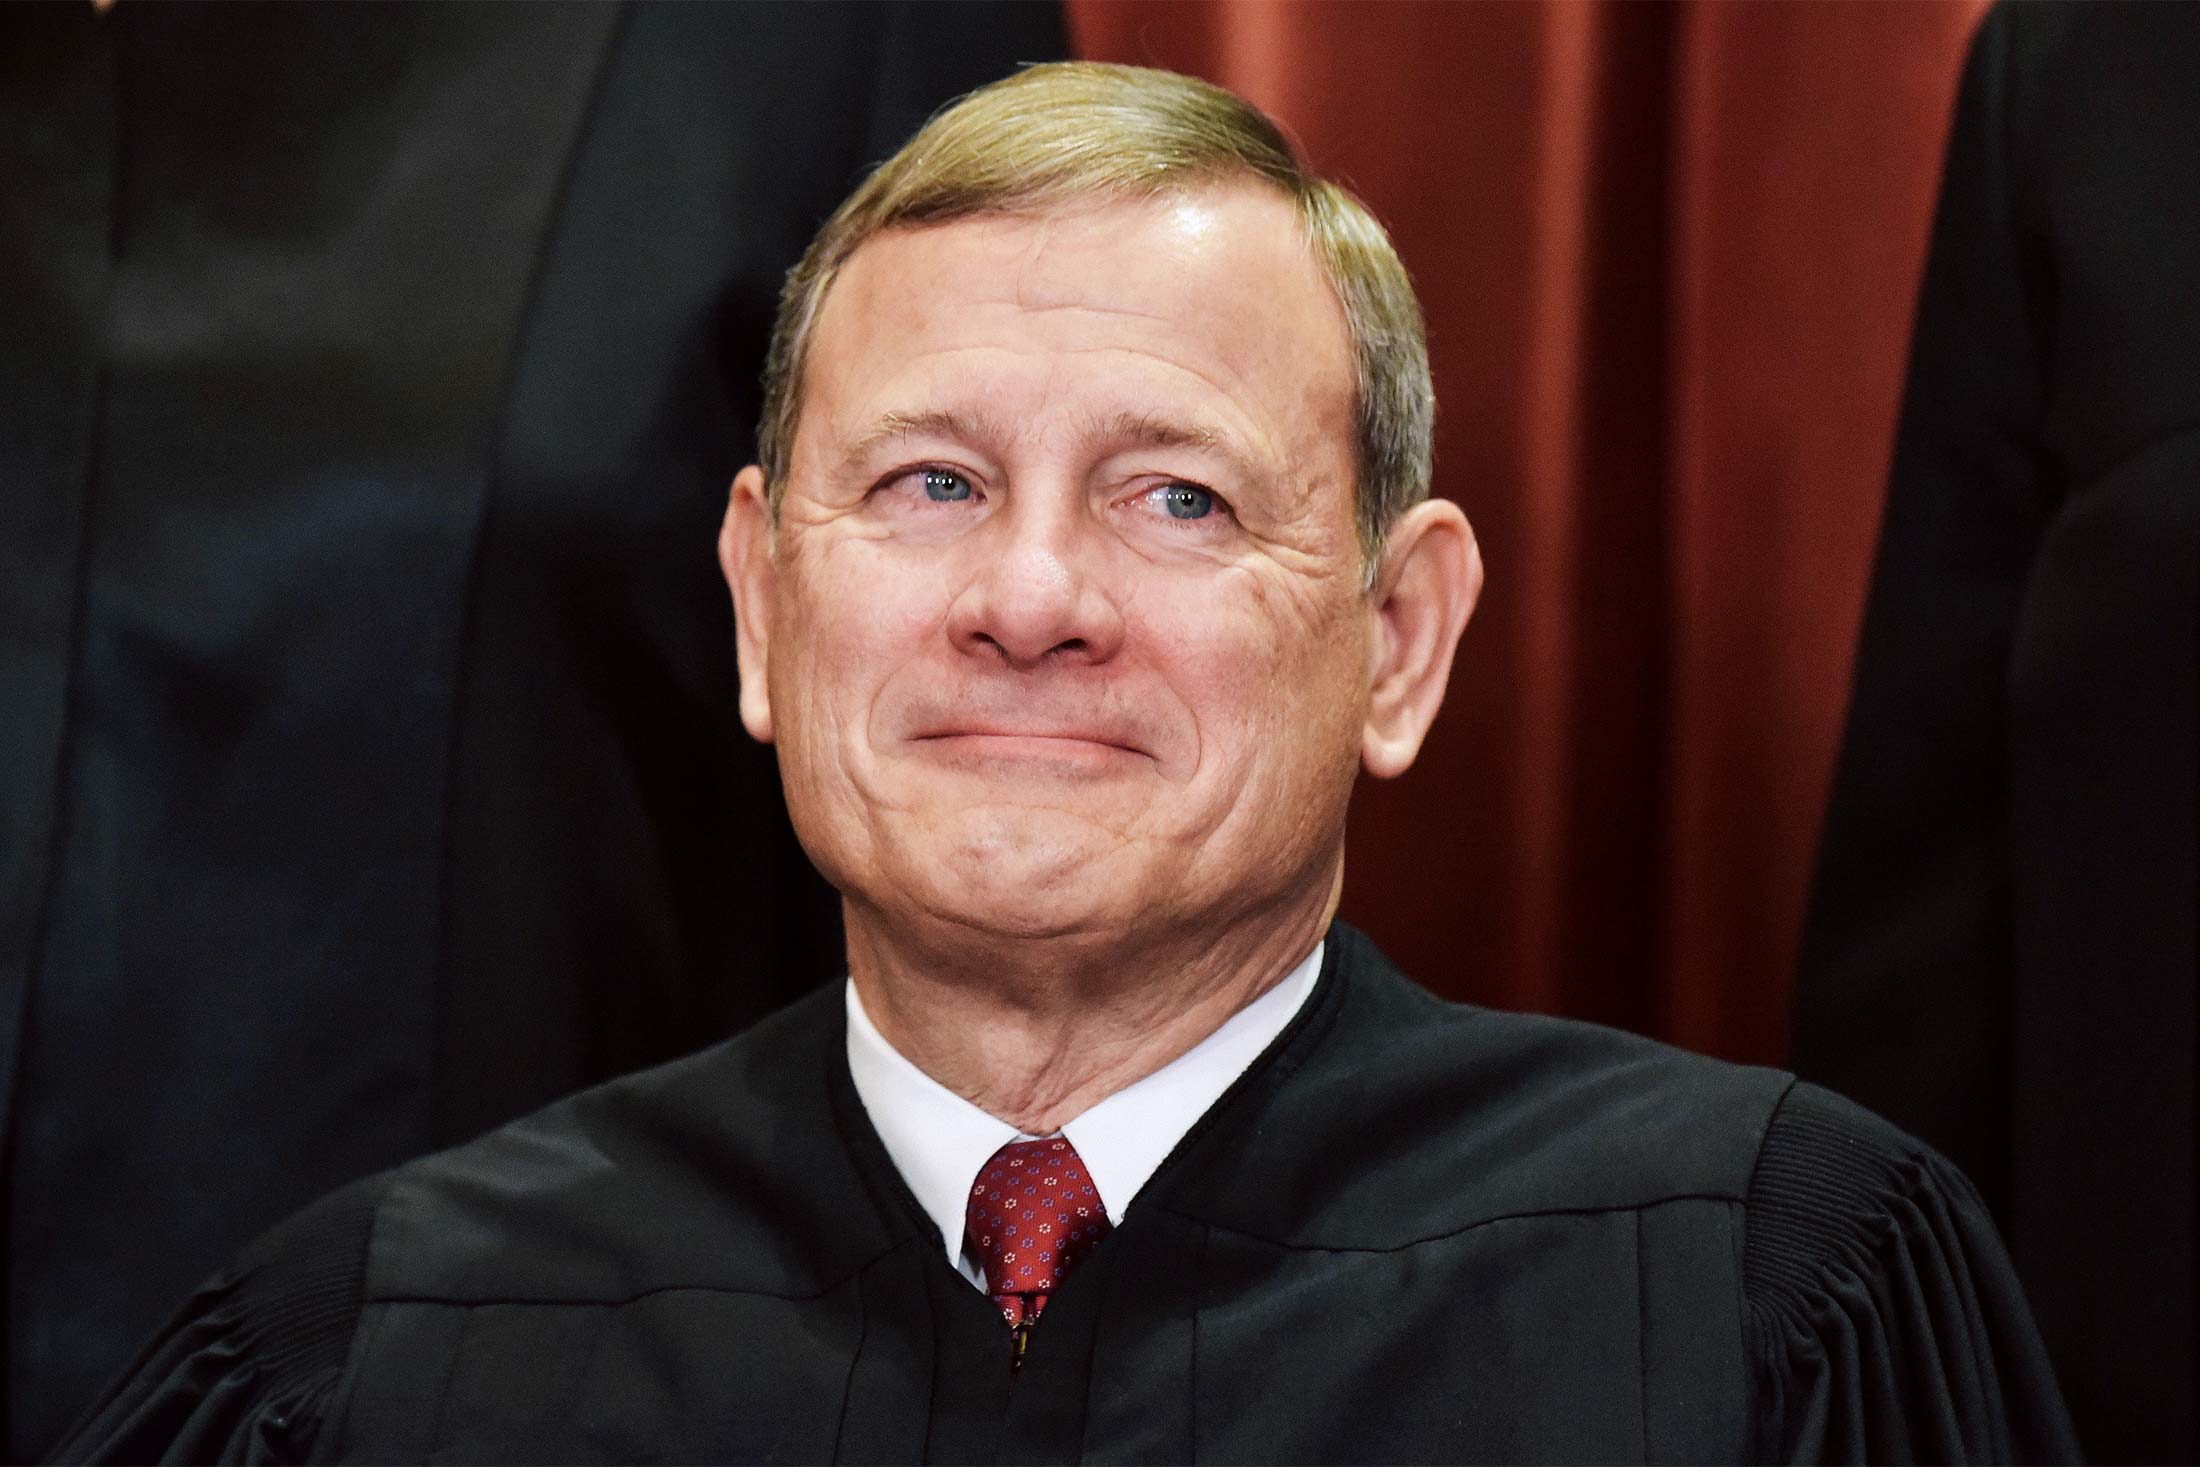 Chief Justice John Roberts poses for the official group photo at the U.S. Supreme Court in Washington on Nov. 30